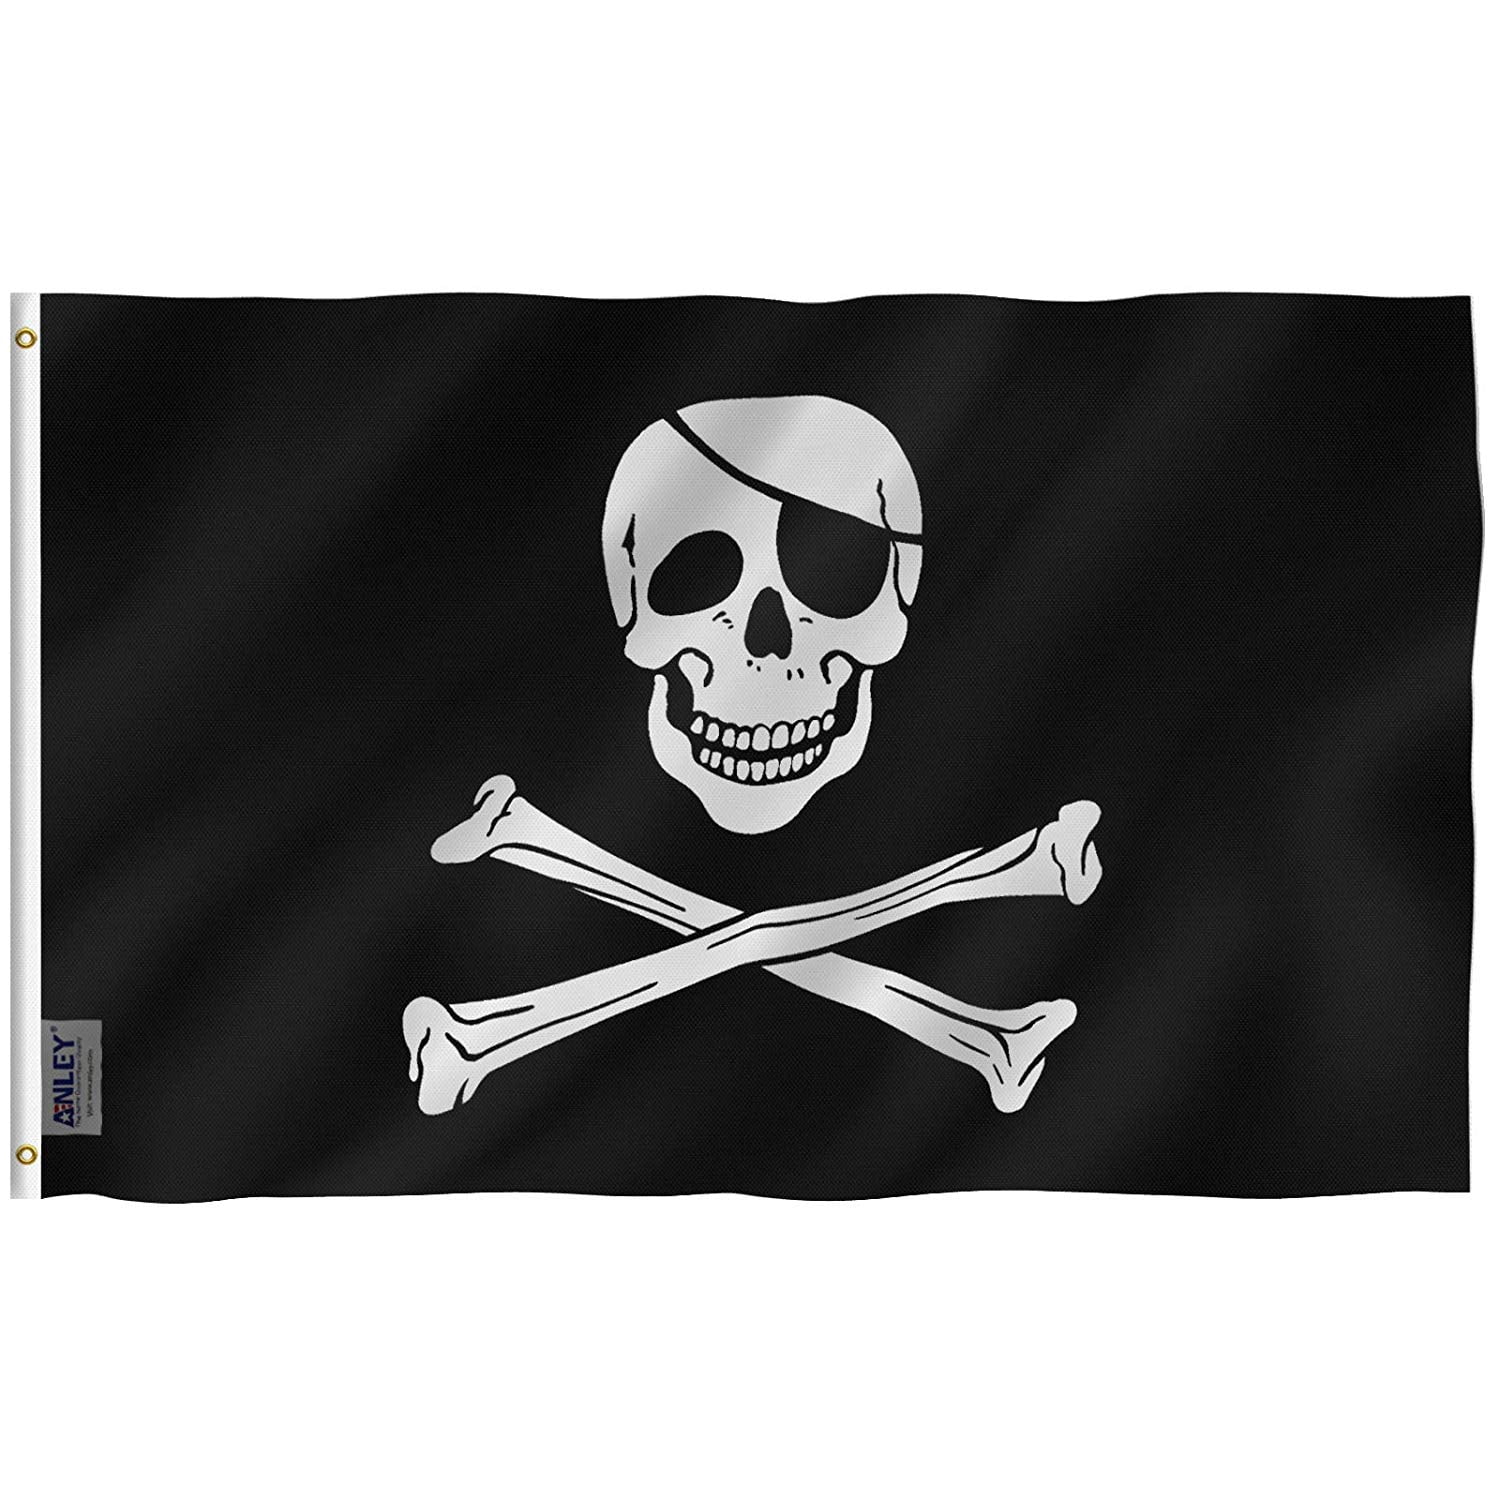 Fish or Cut Bait Pirate Boat Flag Sizes 12x18" & 3x5' All Weather Nylon 